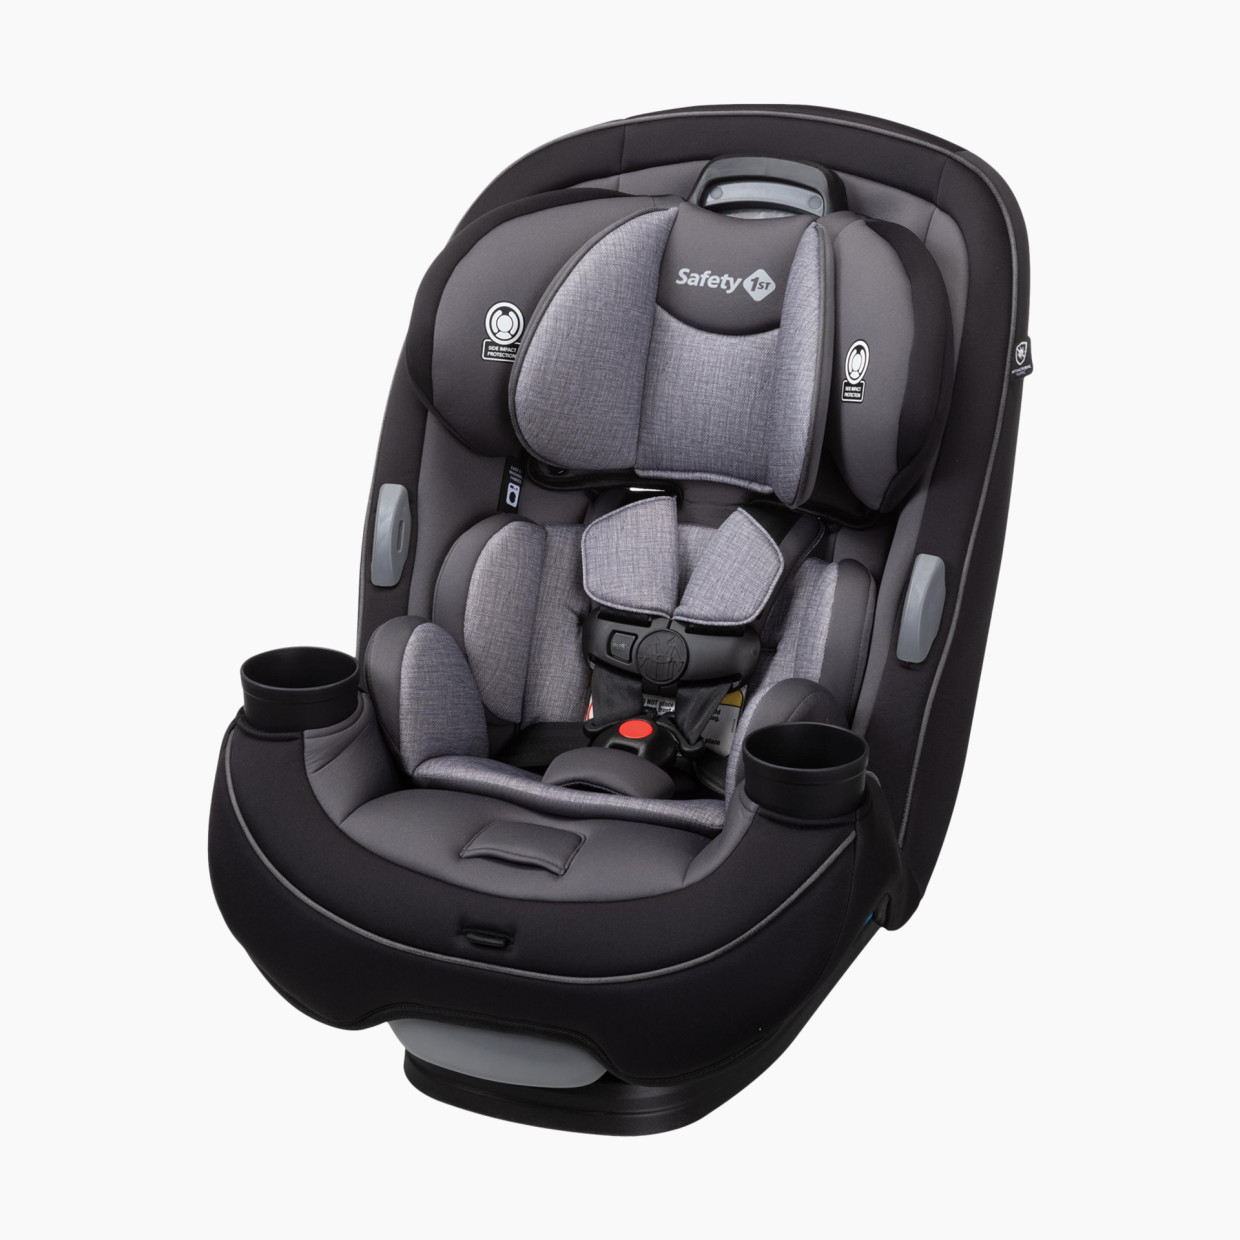 Safety 1st Grow and Go All-in-One Convertible Car Seat - Harvest Moon.